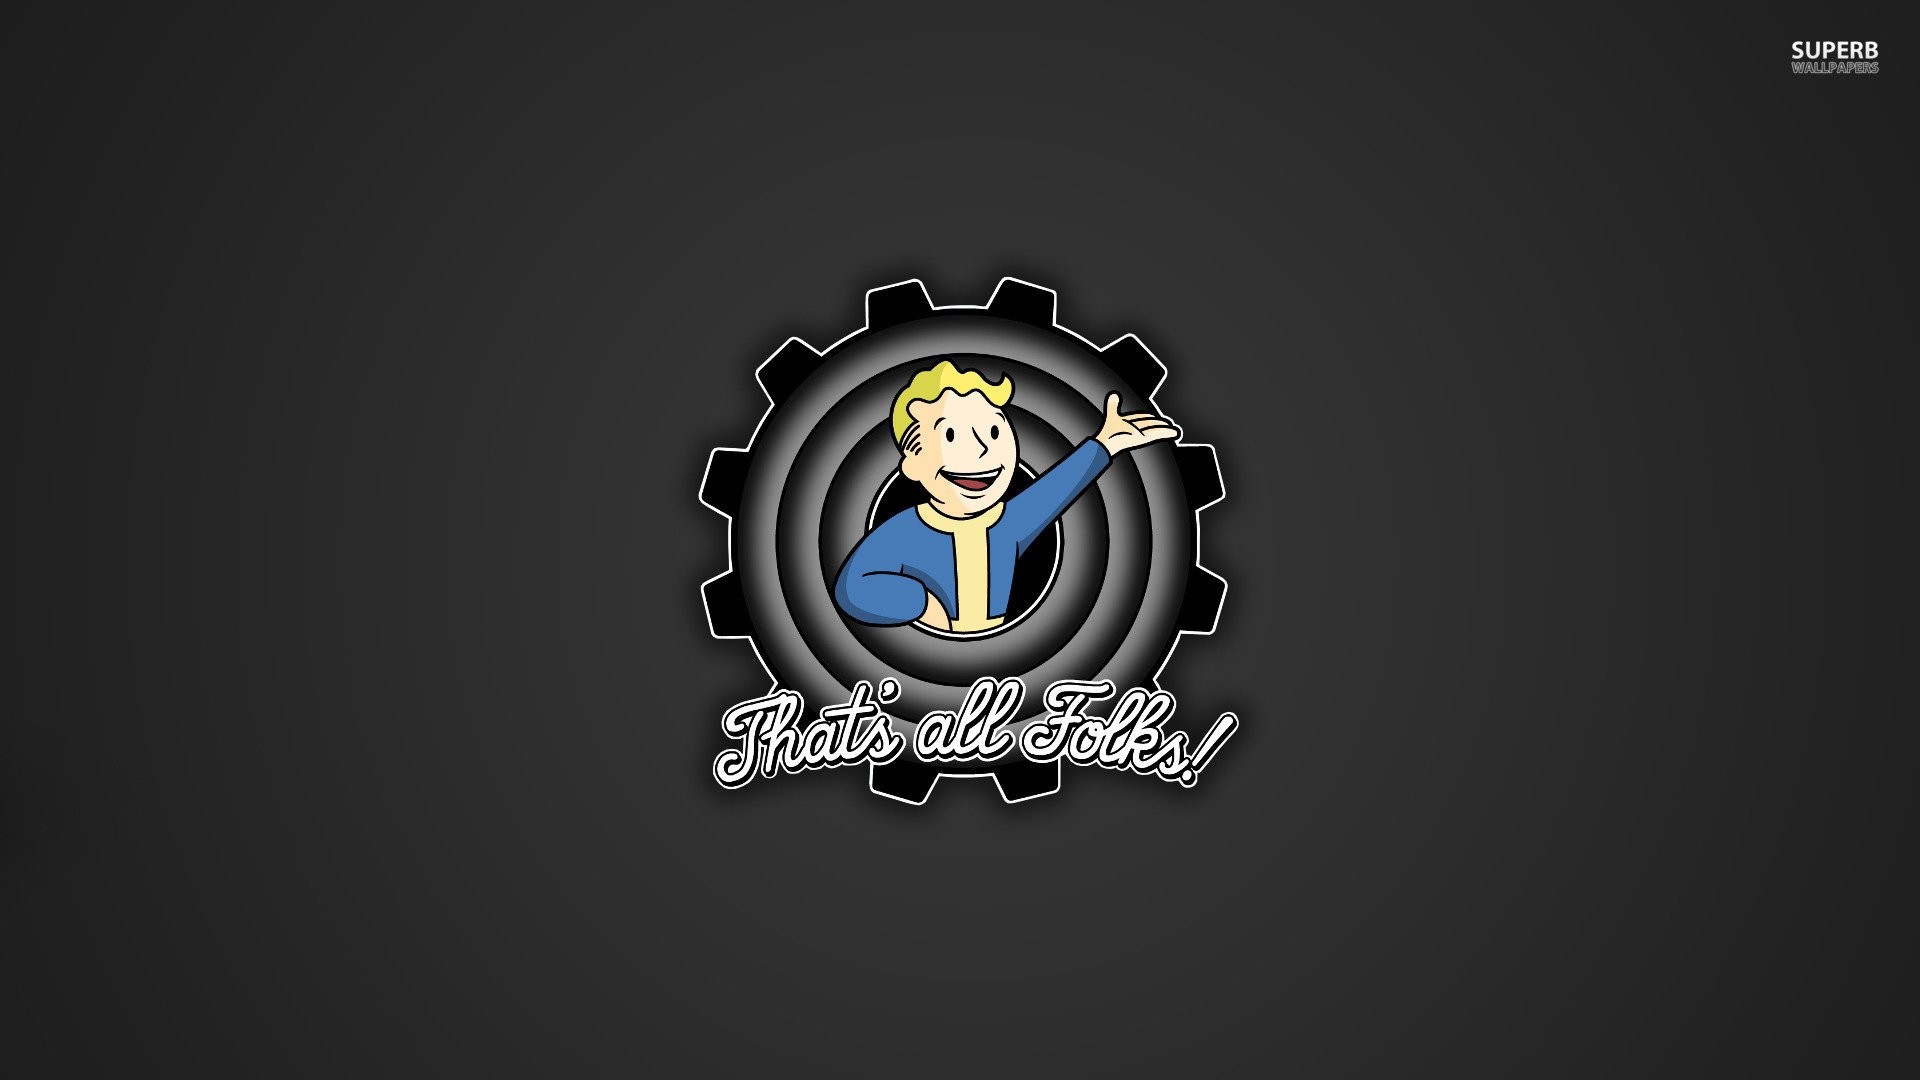 1920x1080 40 Vault Boy Backgrounds Collection for Mobile BsnSCB 